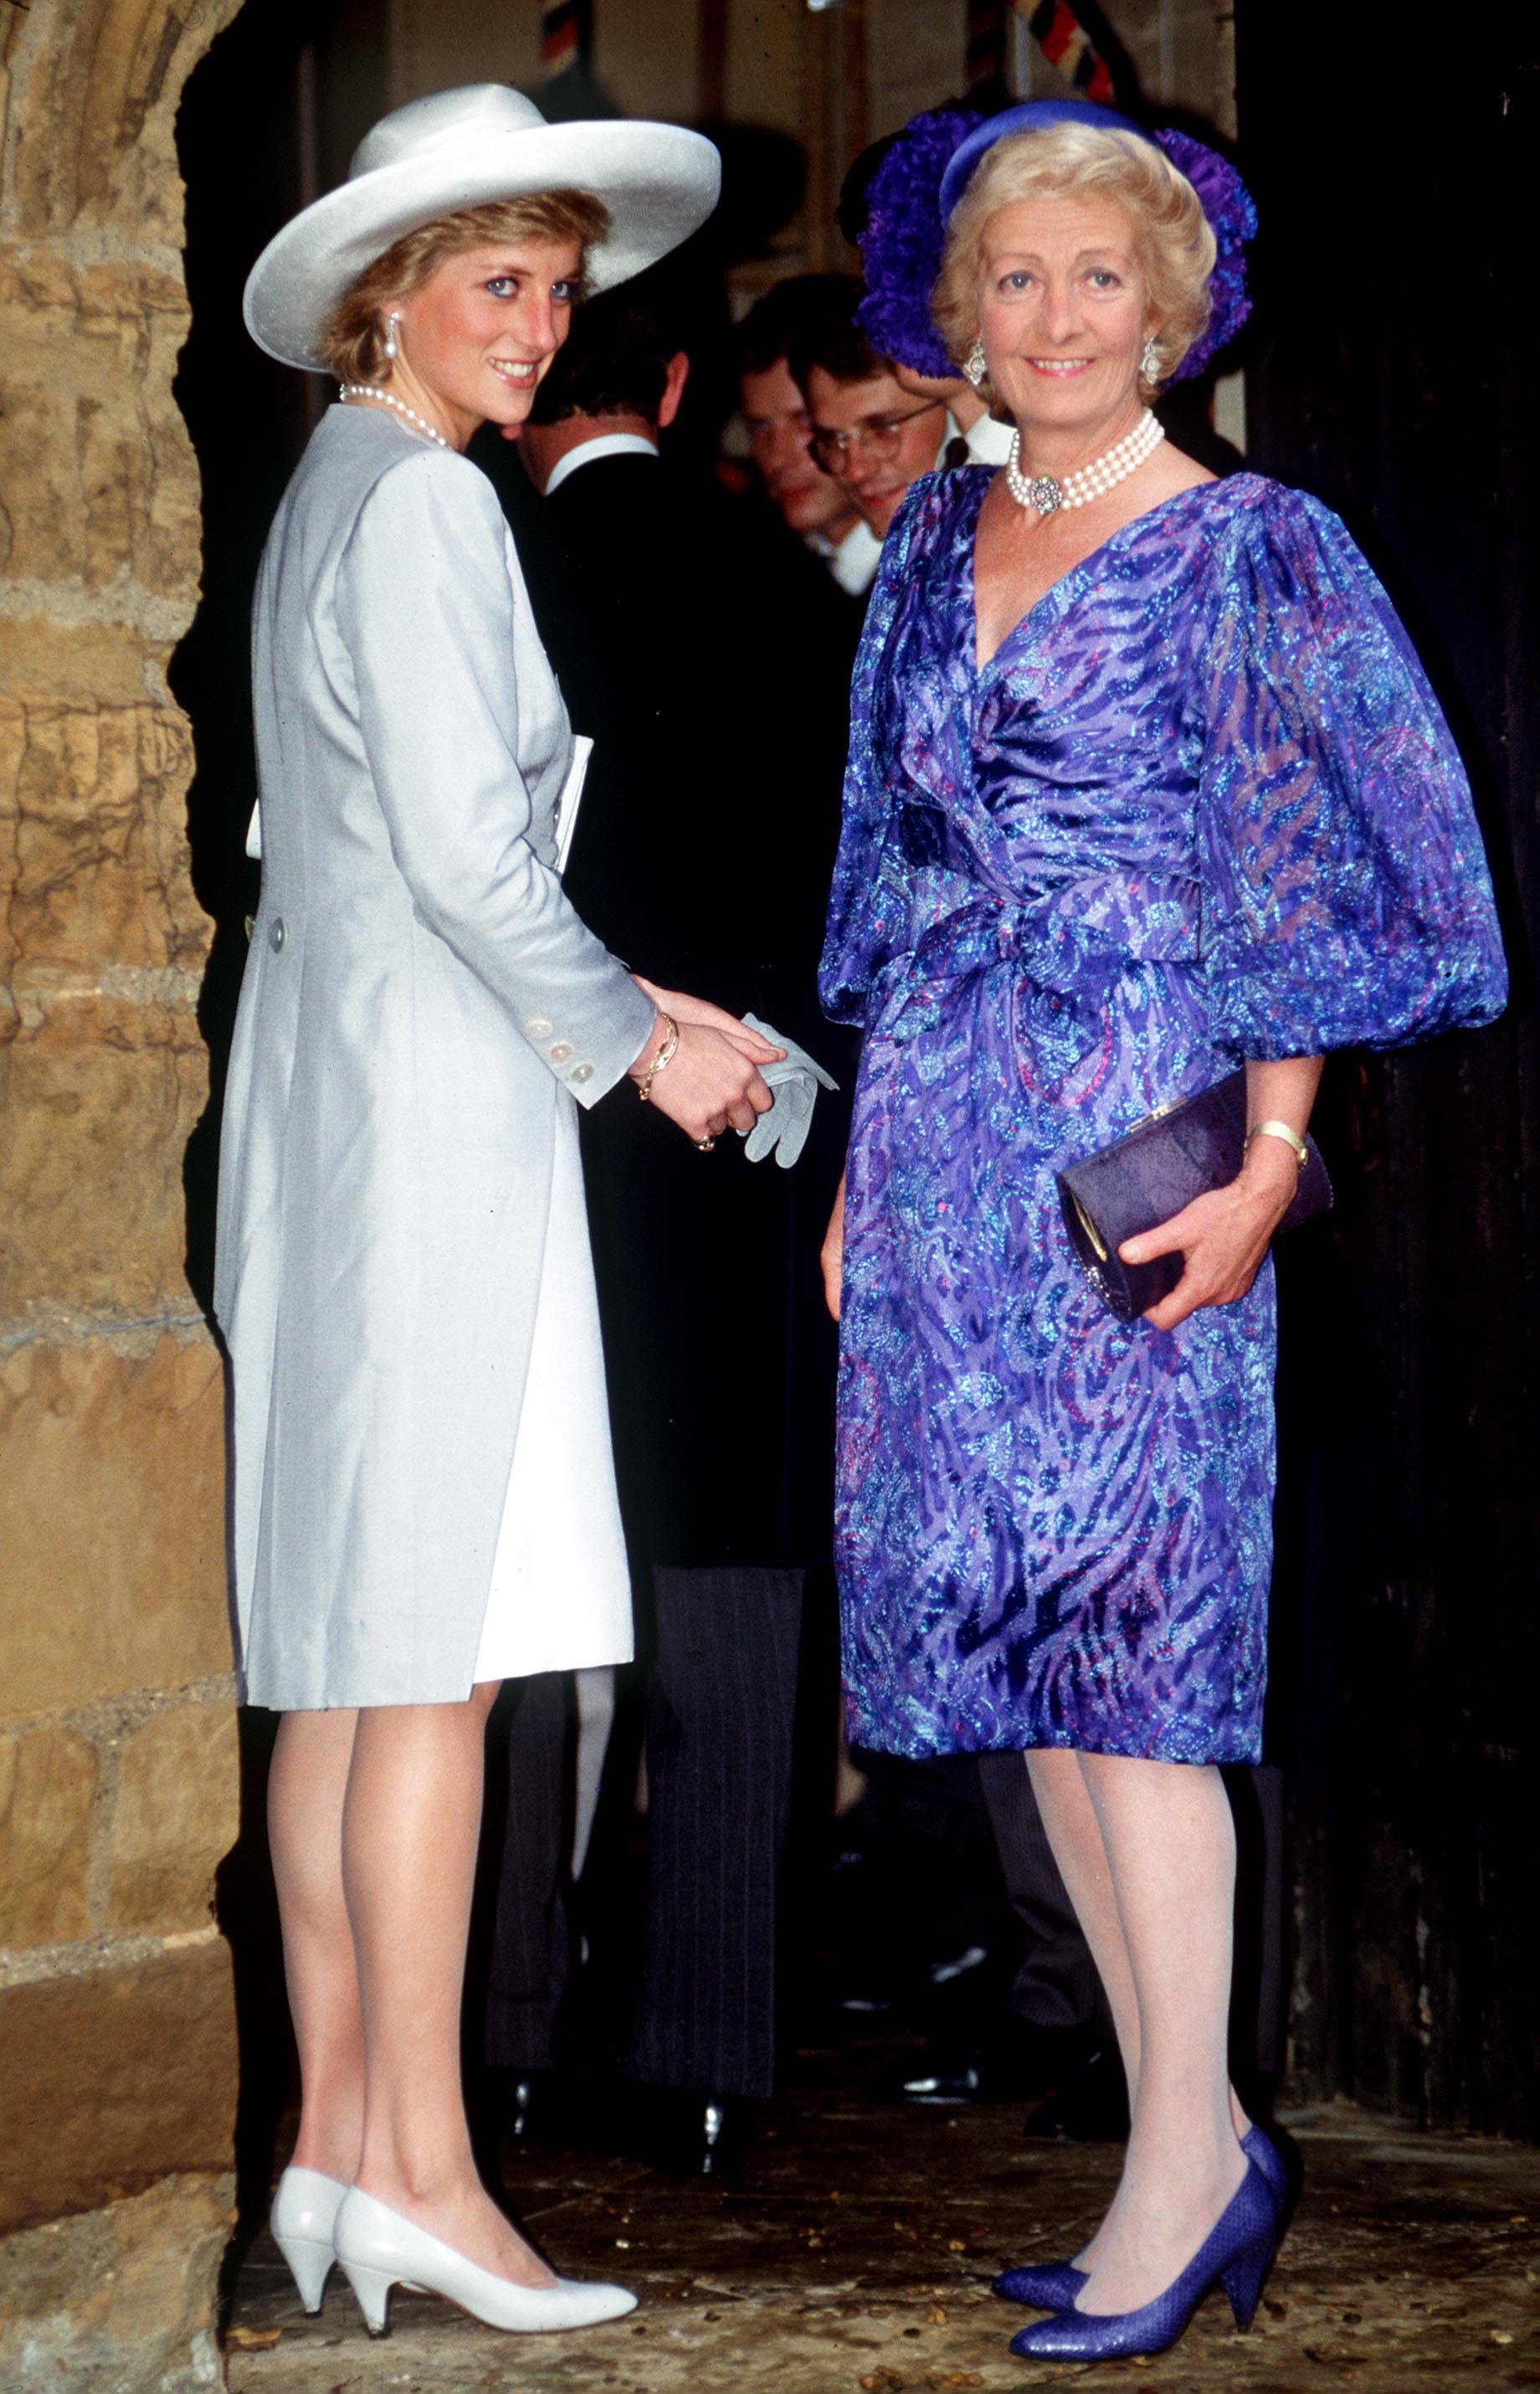 Princess Diana and her mother Frances Shand-Kydd attending the wedding of Viscount and Viscountess Althorp at the church of St Mary The Virgin in Great Brington. | Source: Getty Images